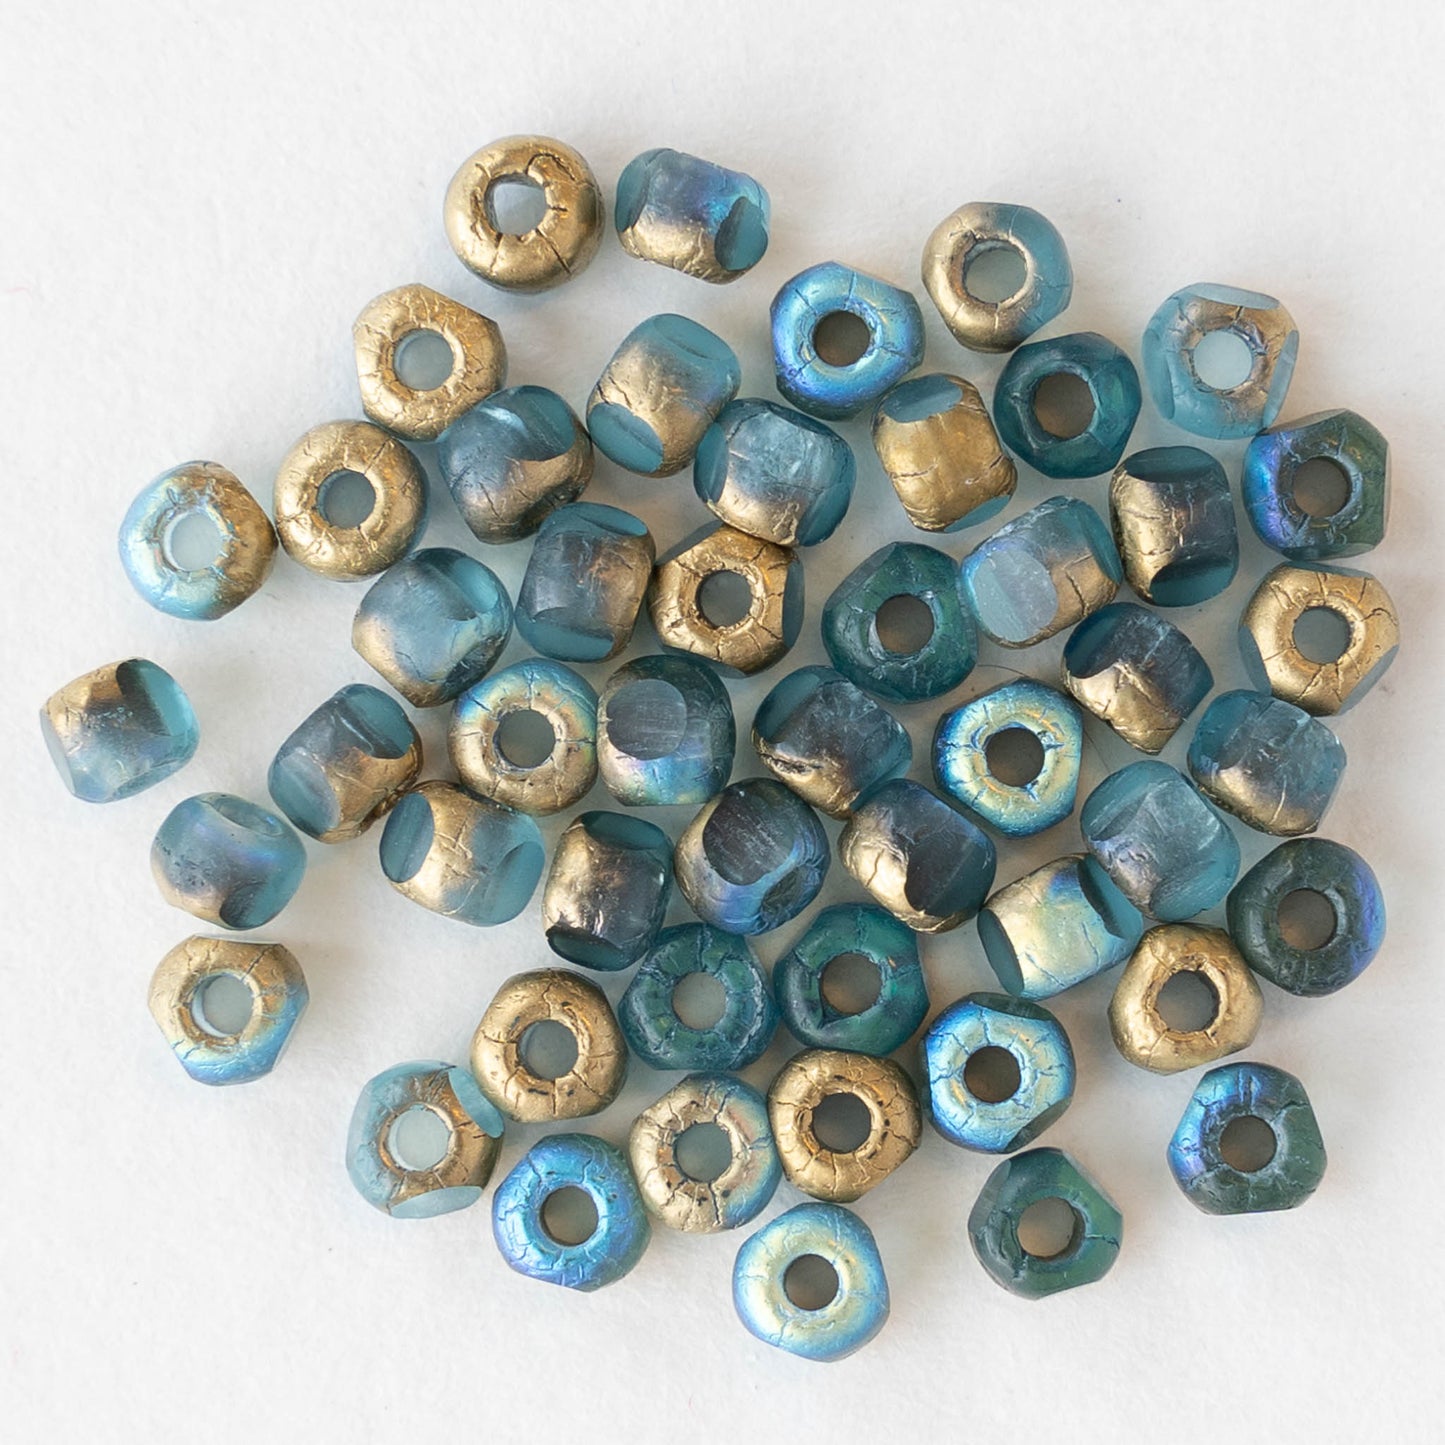 6/0 Tri-cut Seed Beads - Light Blue with an Etched Gold Finish - 50